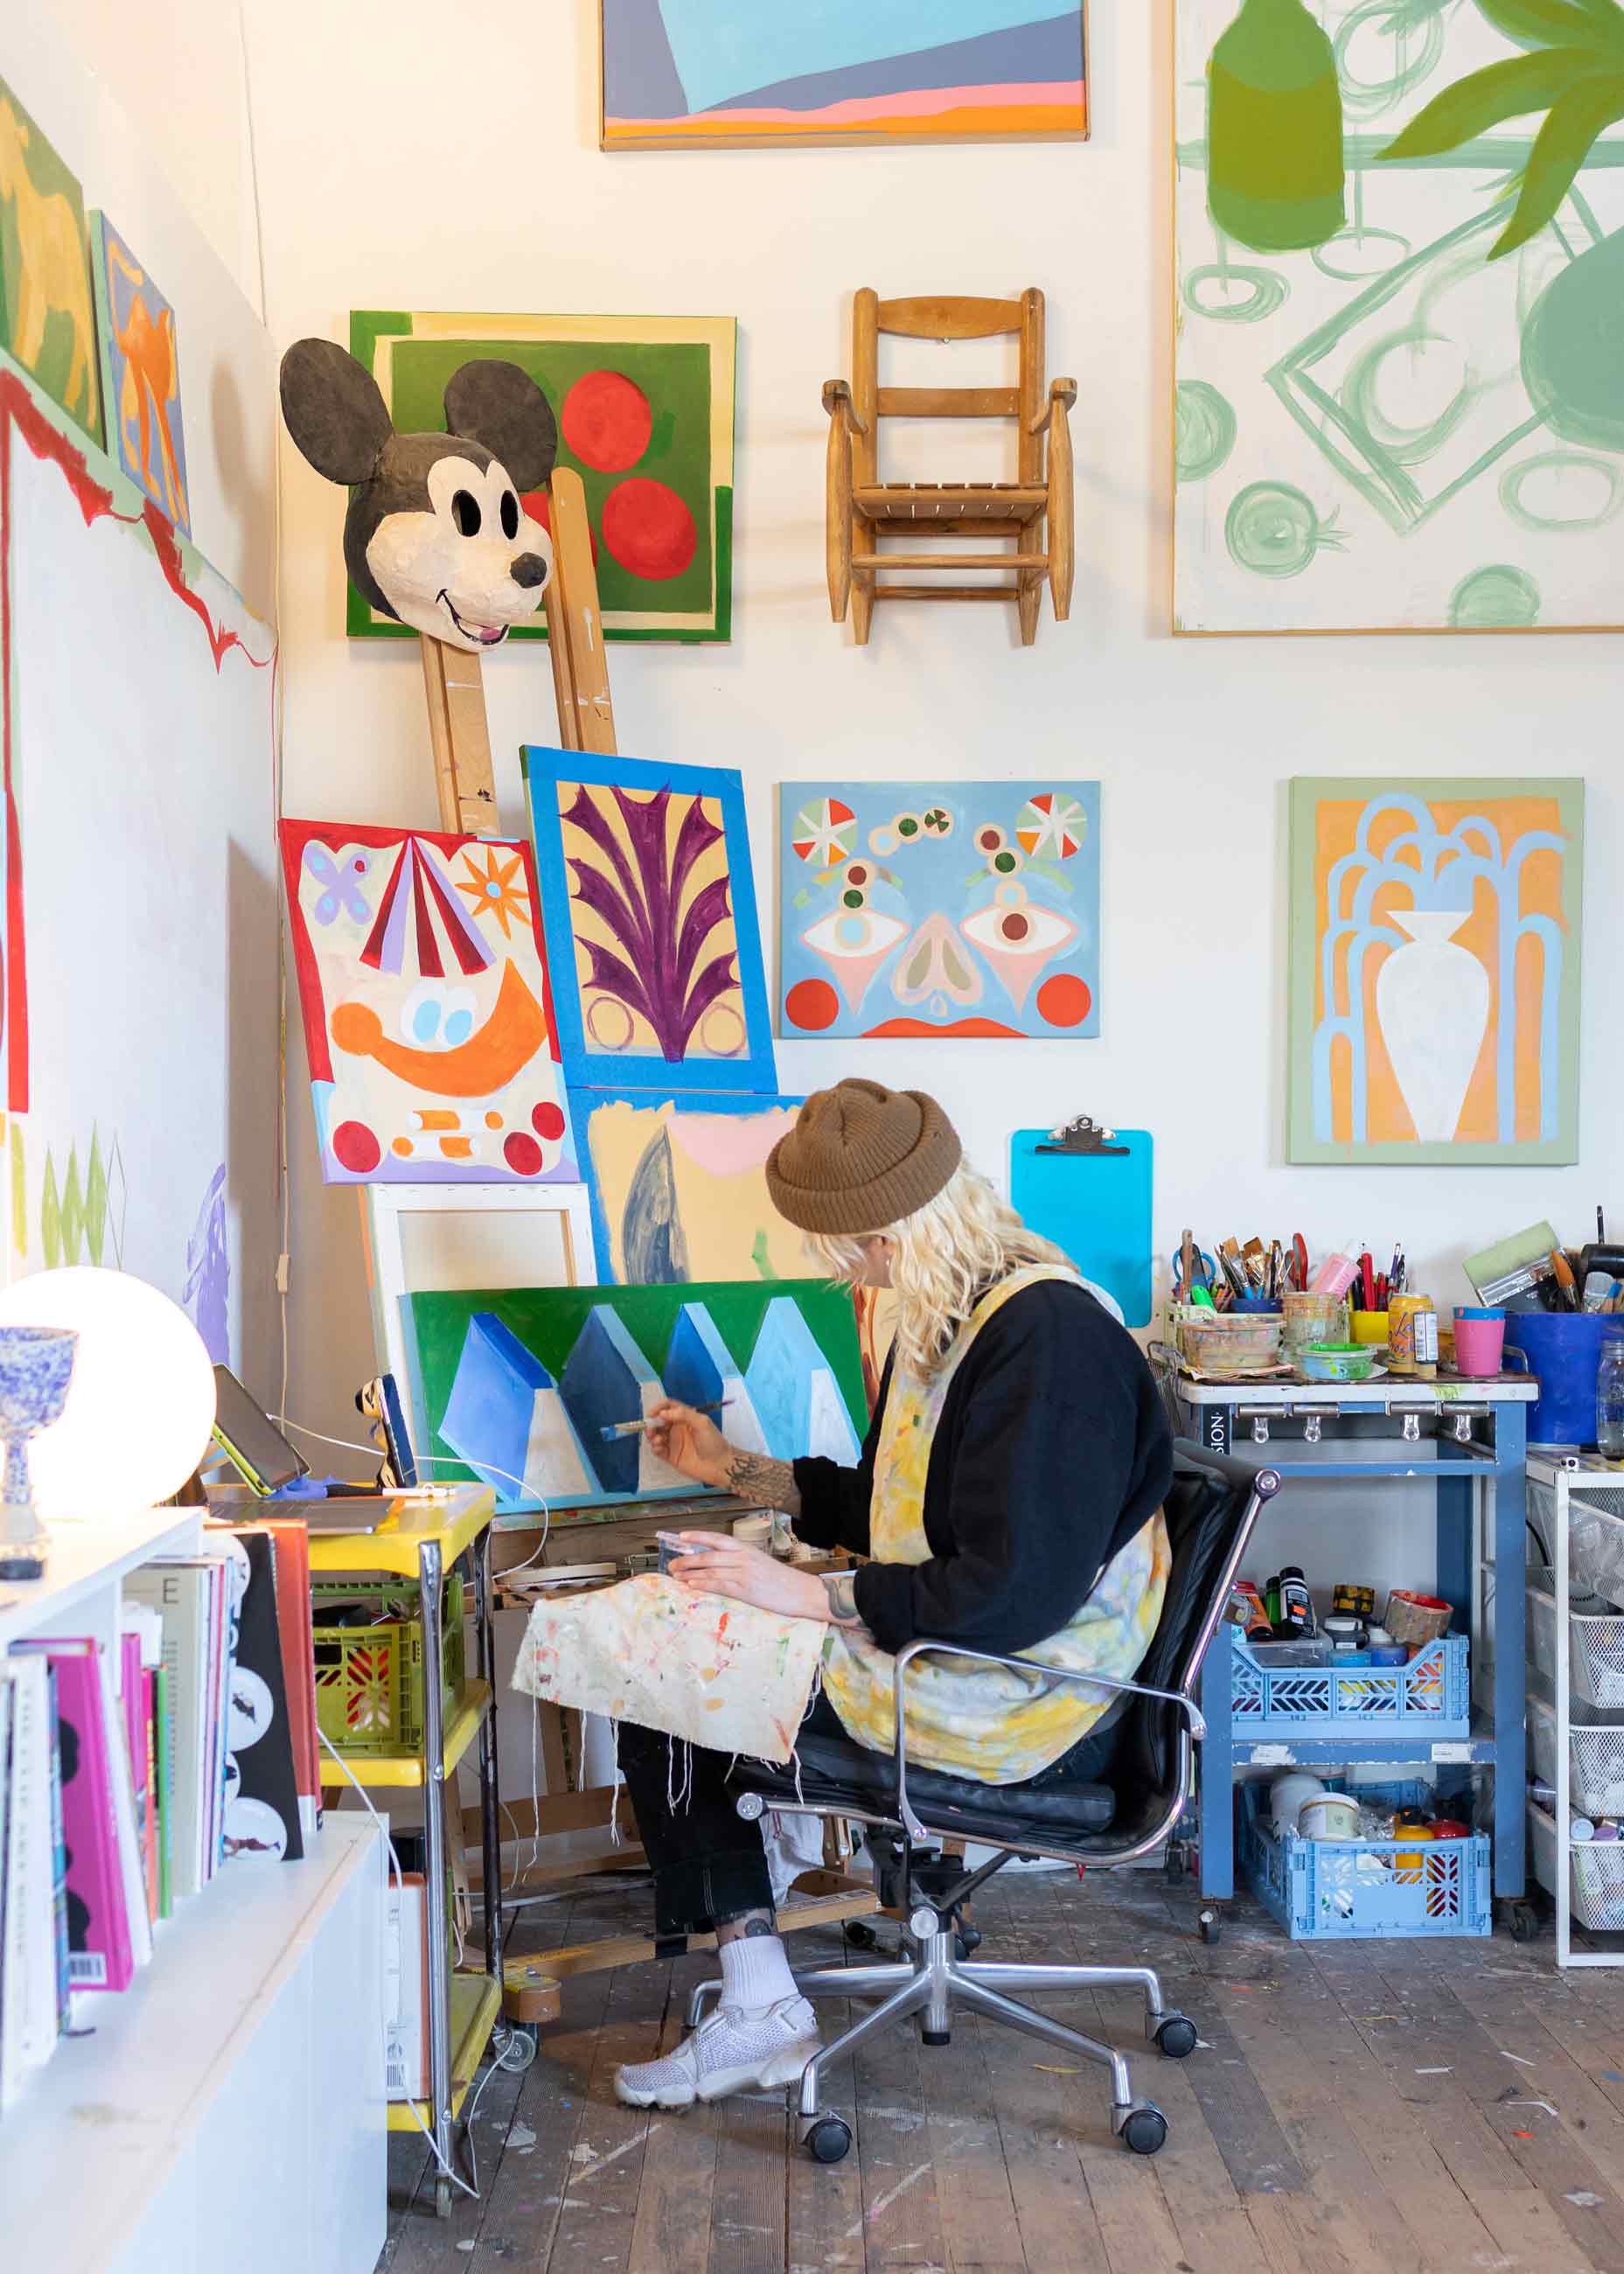 Person sitting in chair painting in art studio. 